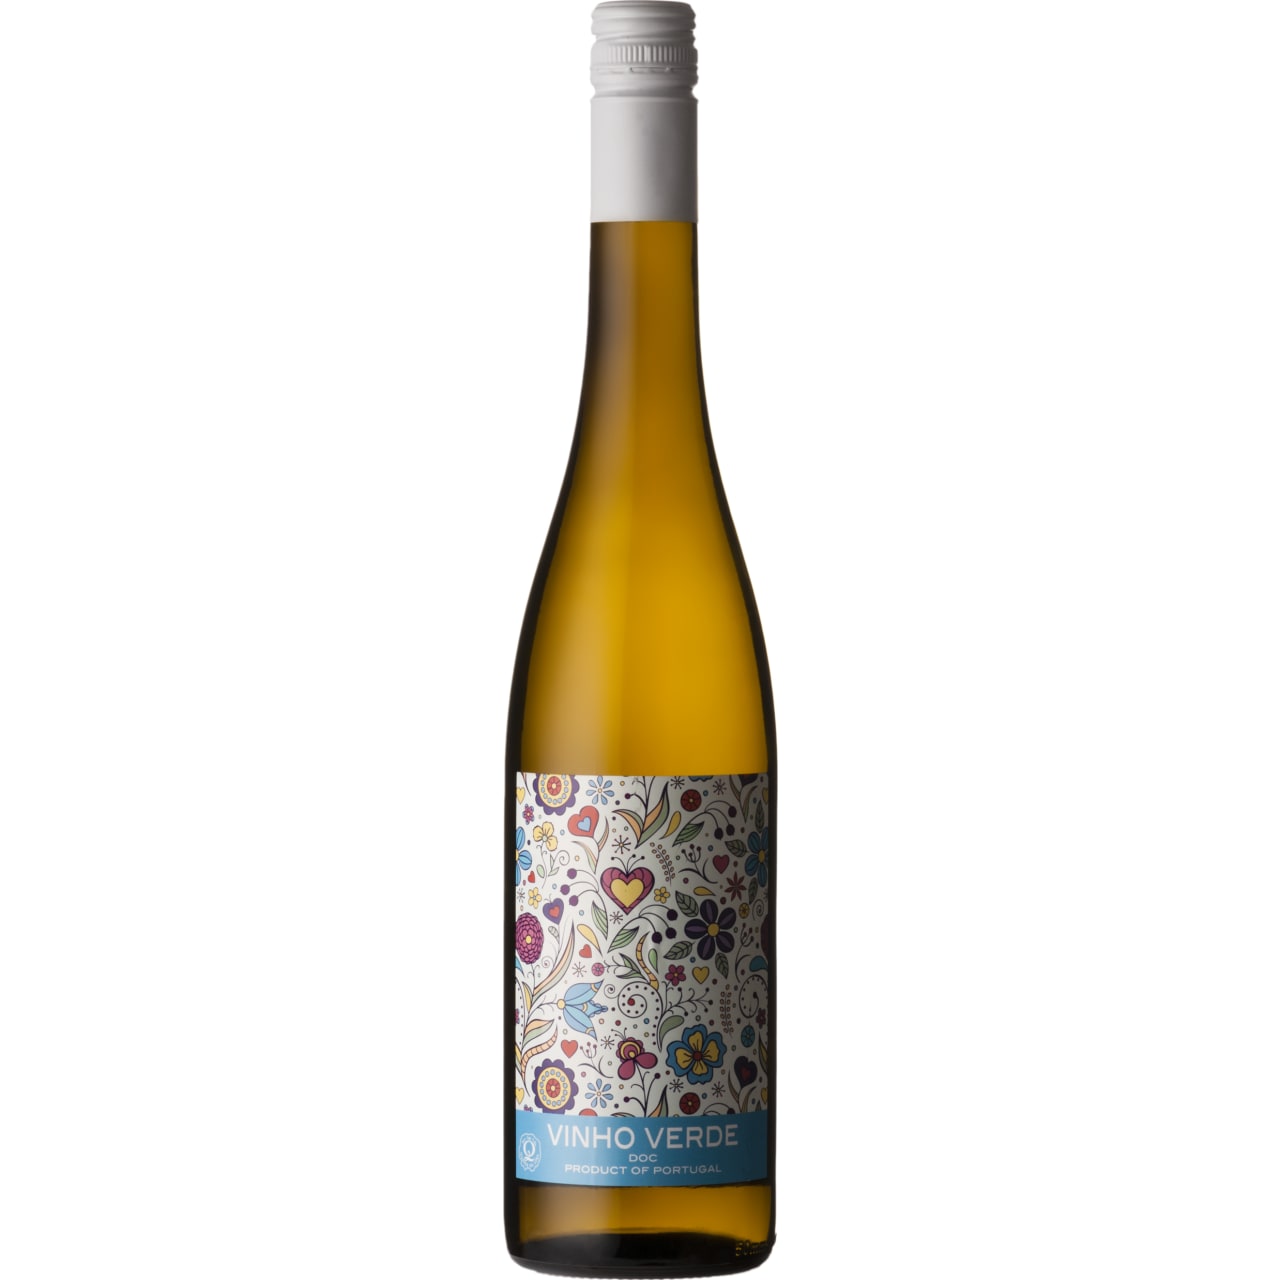 A lip-smackingly delicious Vinho Verde, with aromas of apple and grapefruit alongside herbal notes. The palate is medium-bodied and refreshing, with the classic touch of spritz.